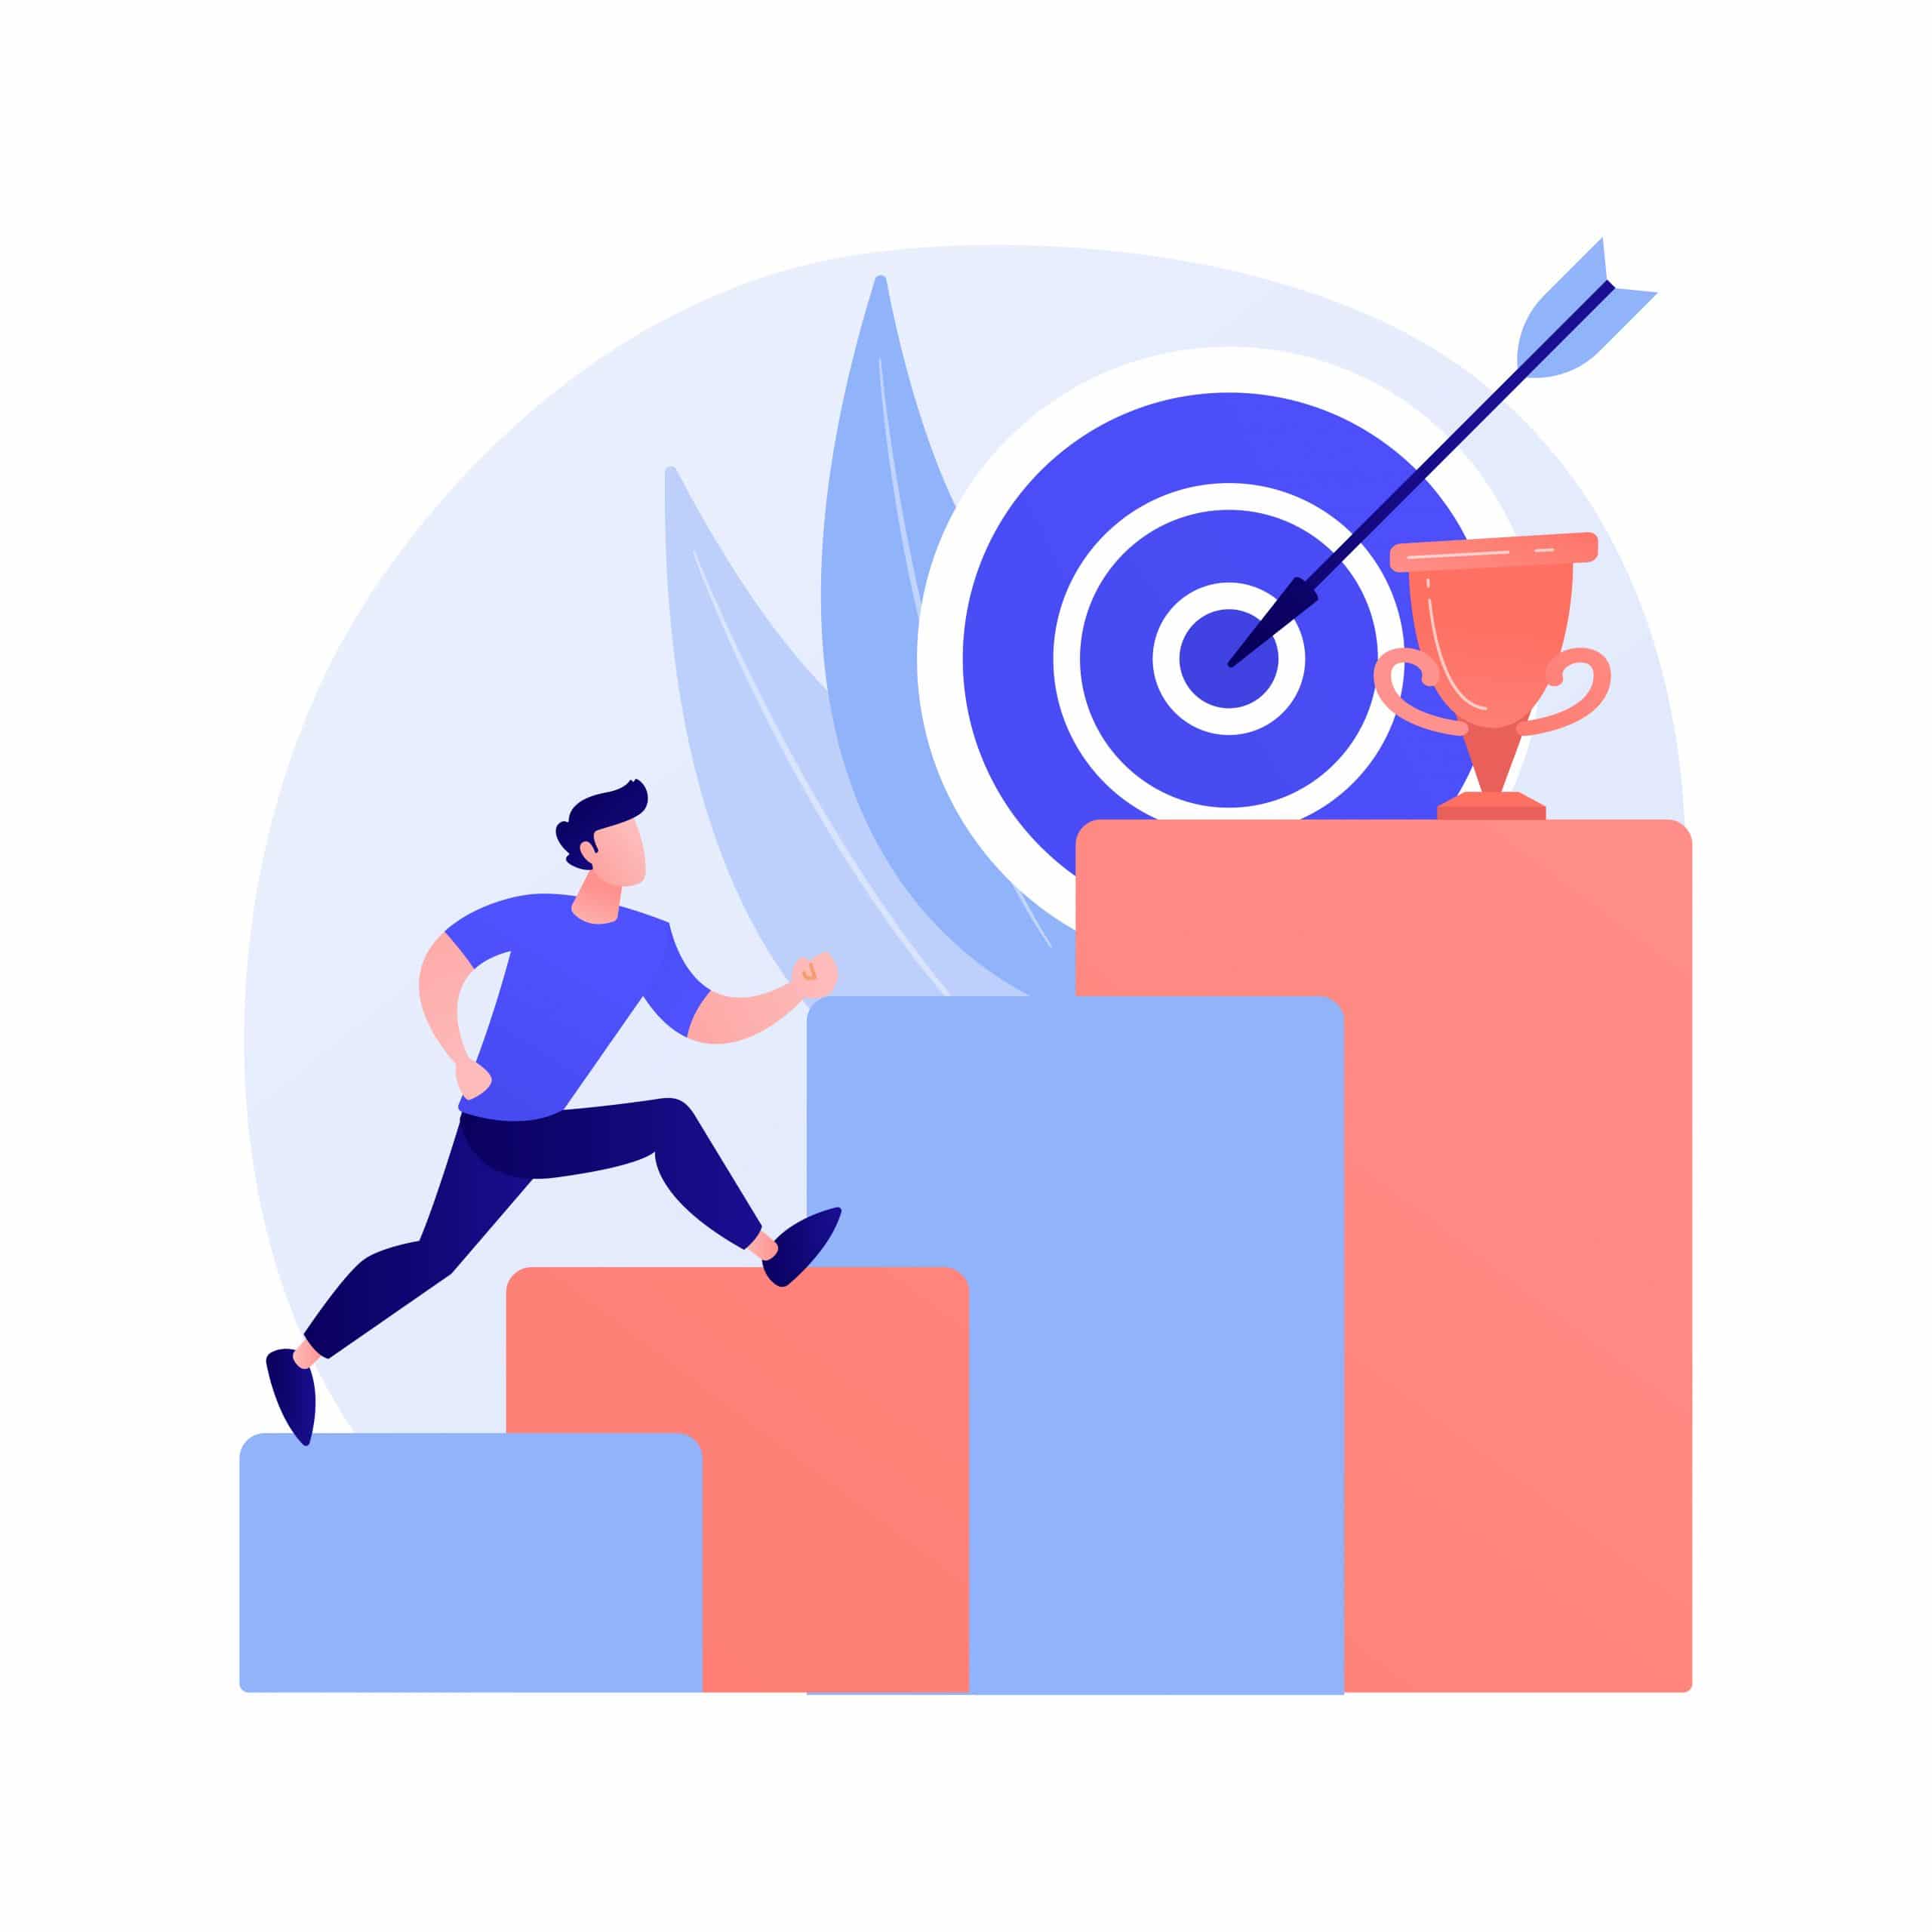 Ambition abstract concept vector illustration. Business ambition, determination, setting big goal, making fast career, self-confident, getting what you want, desire for success abstract metaphor.